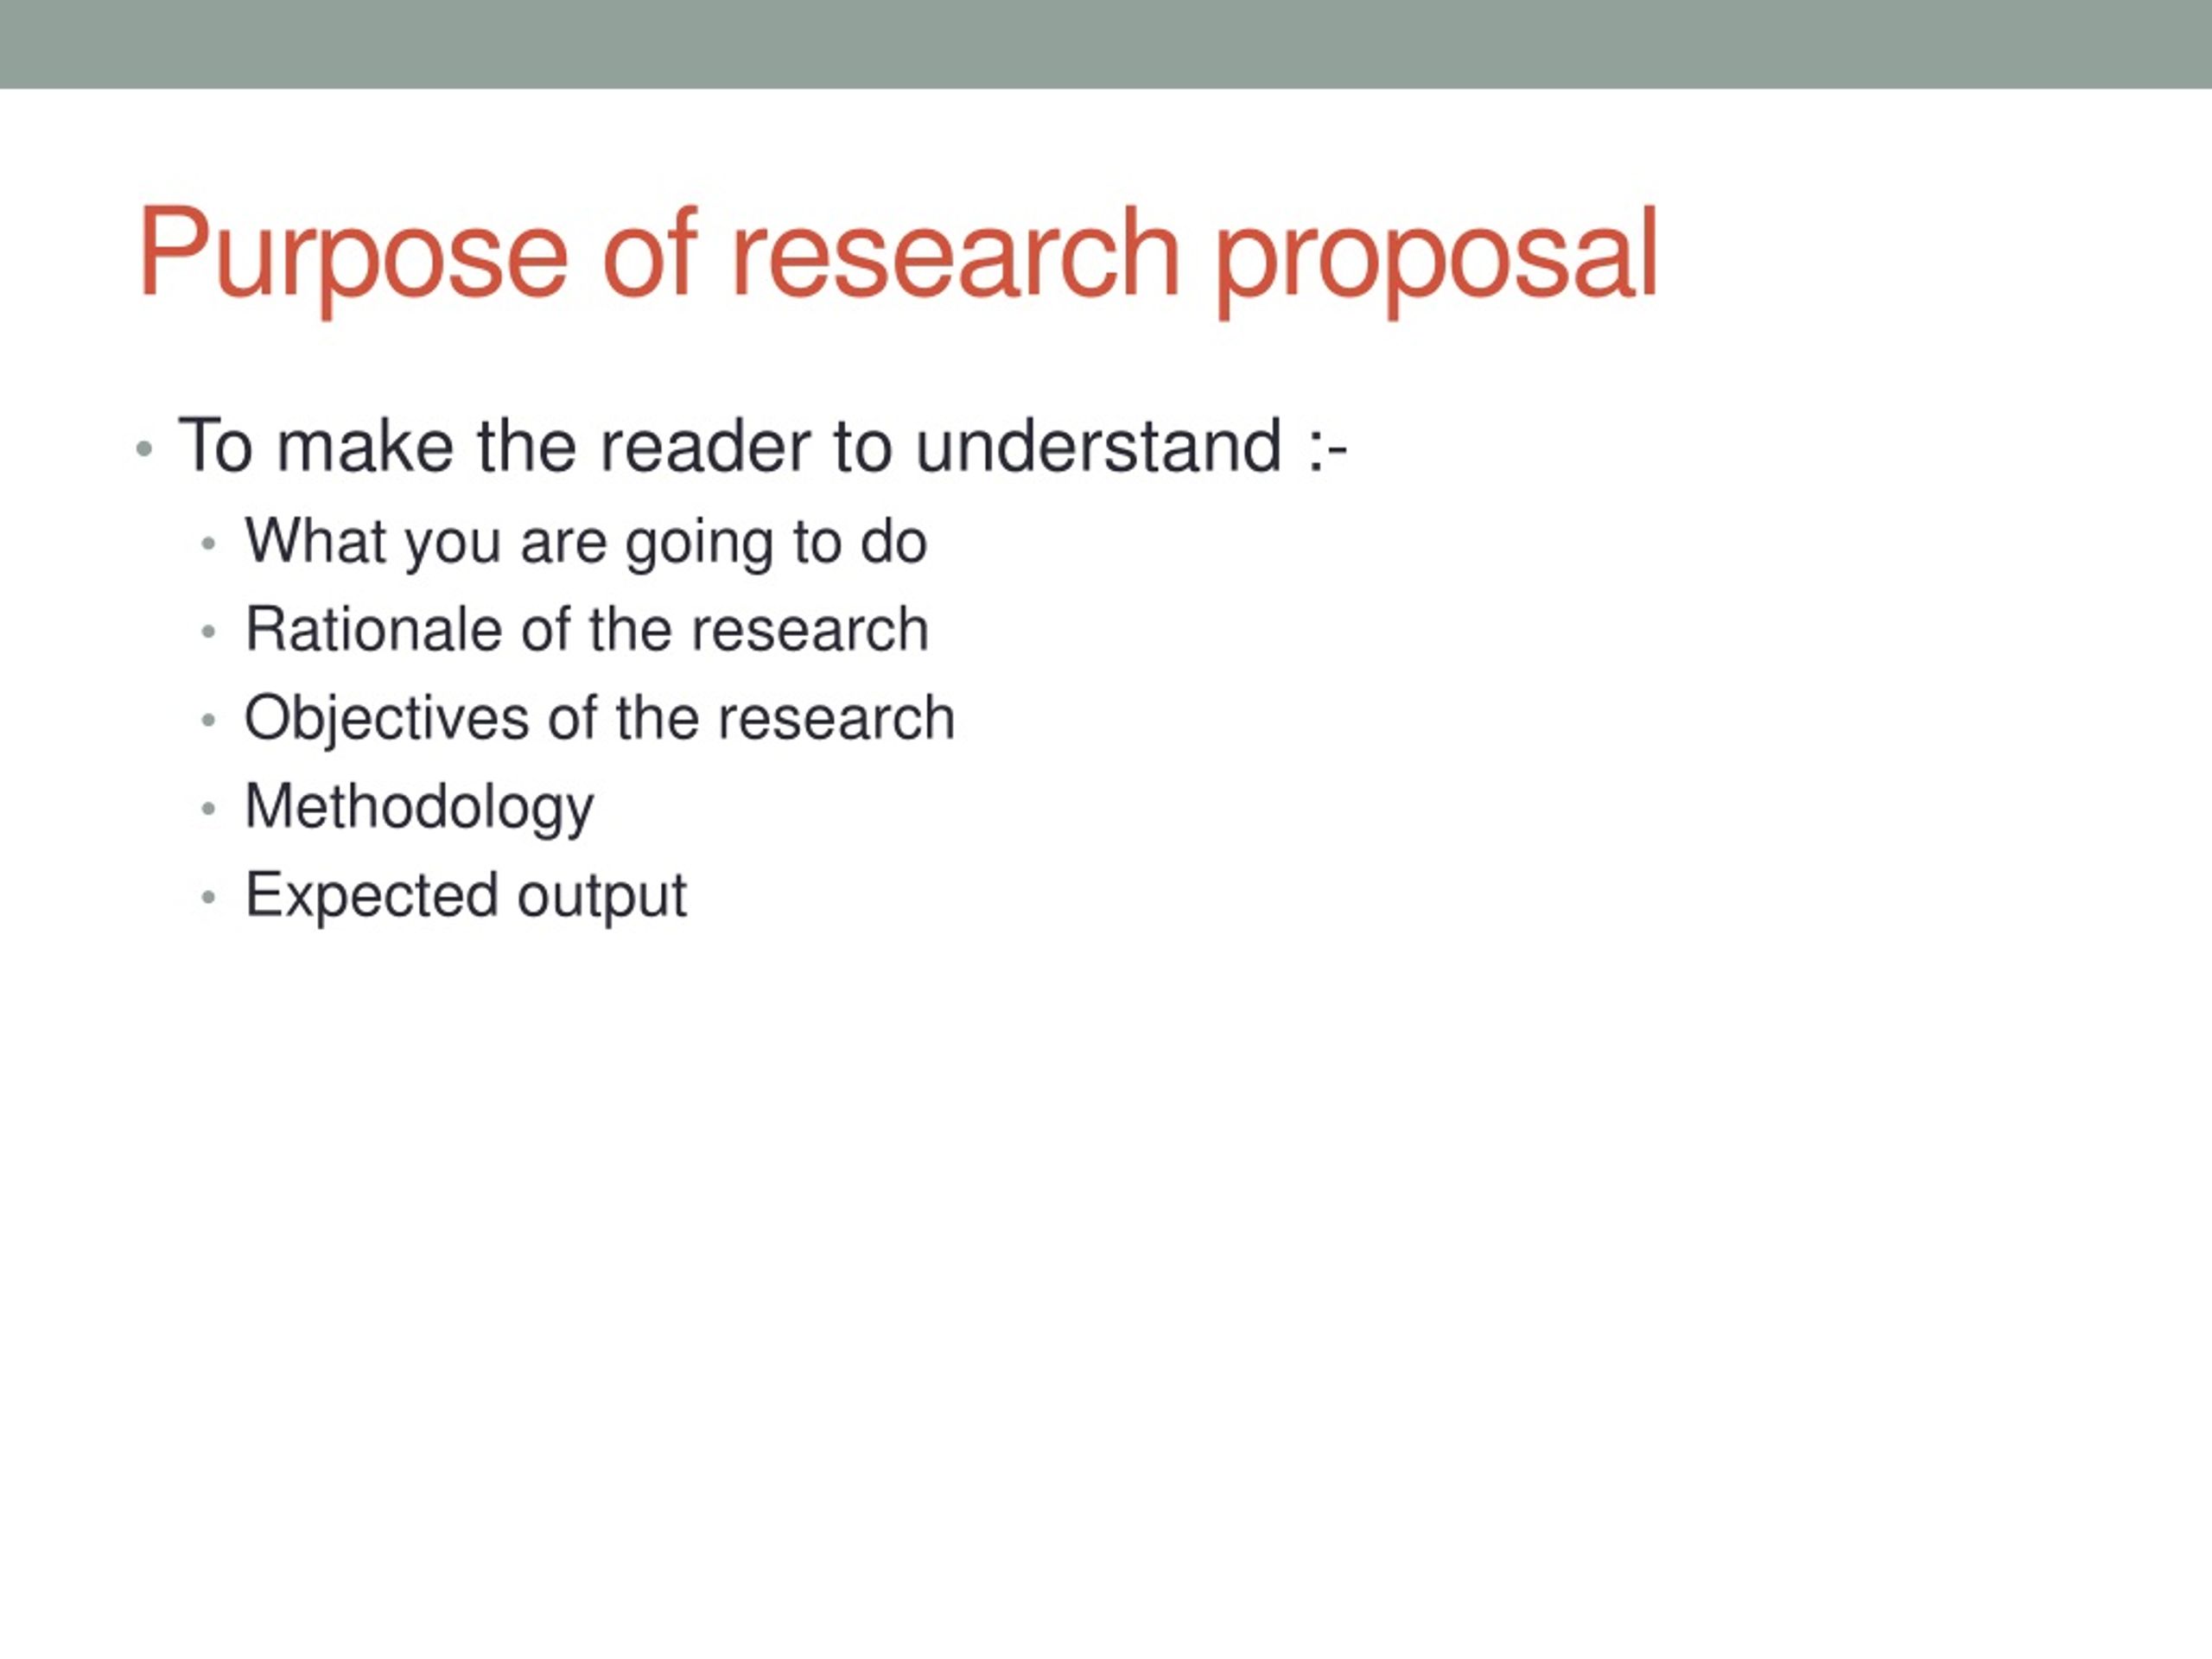 purpose of research proposal slideshare